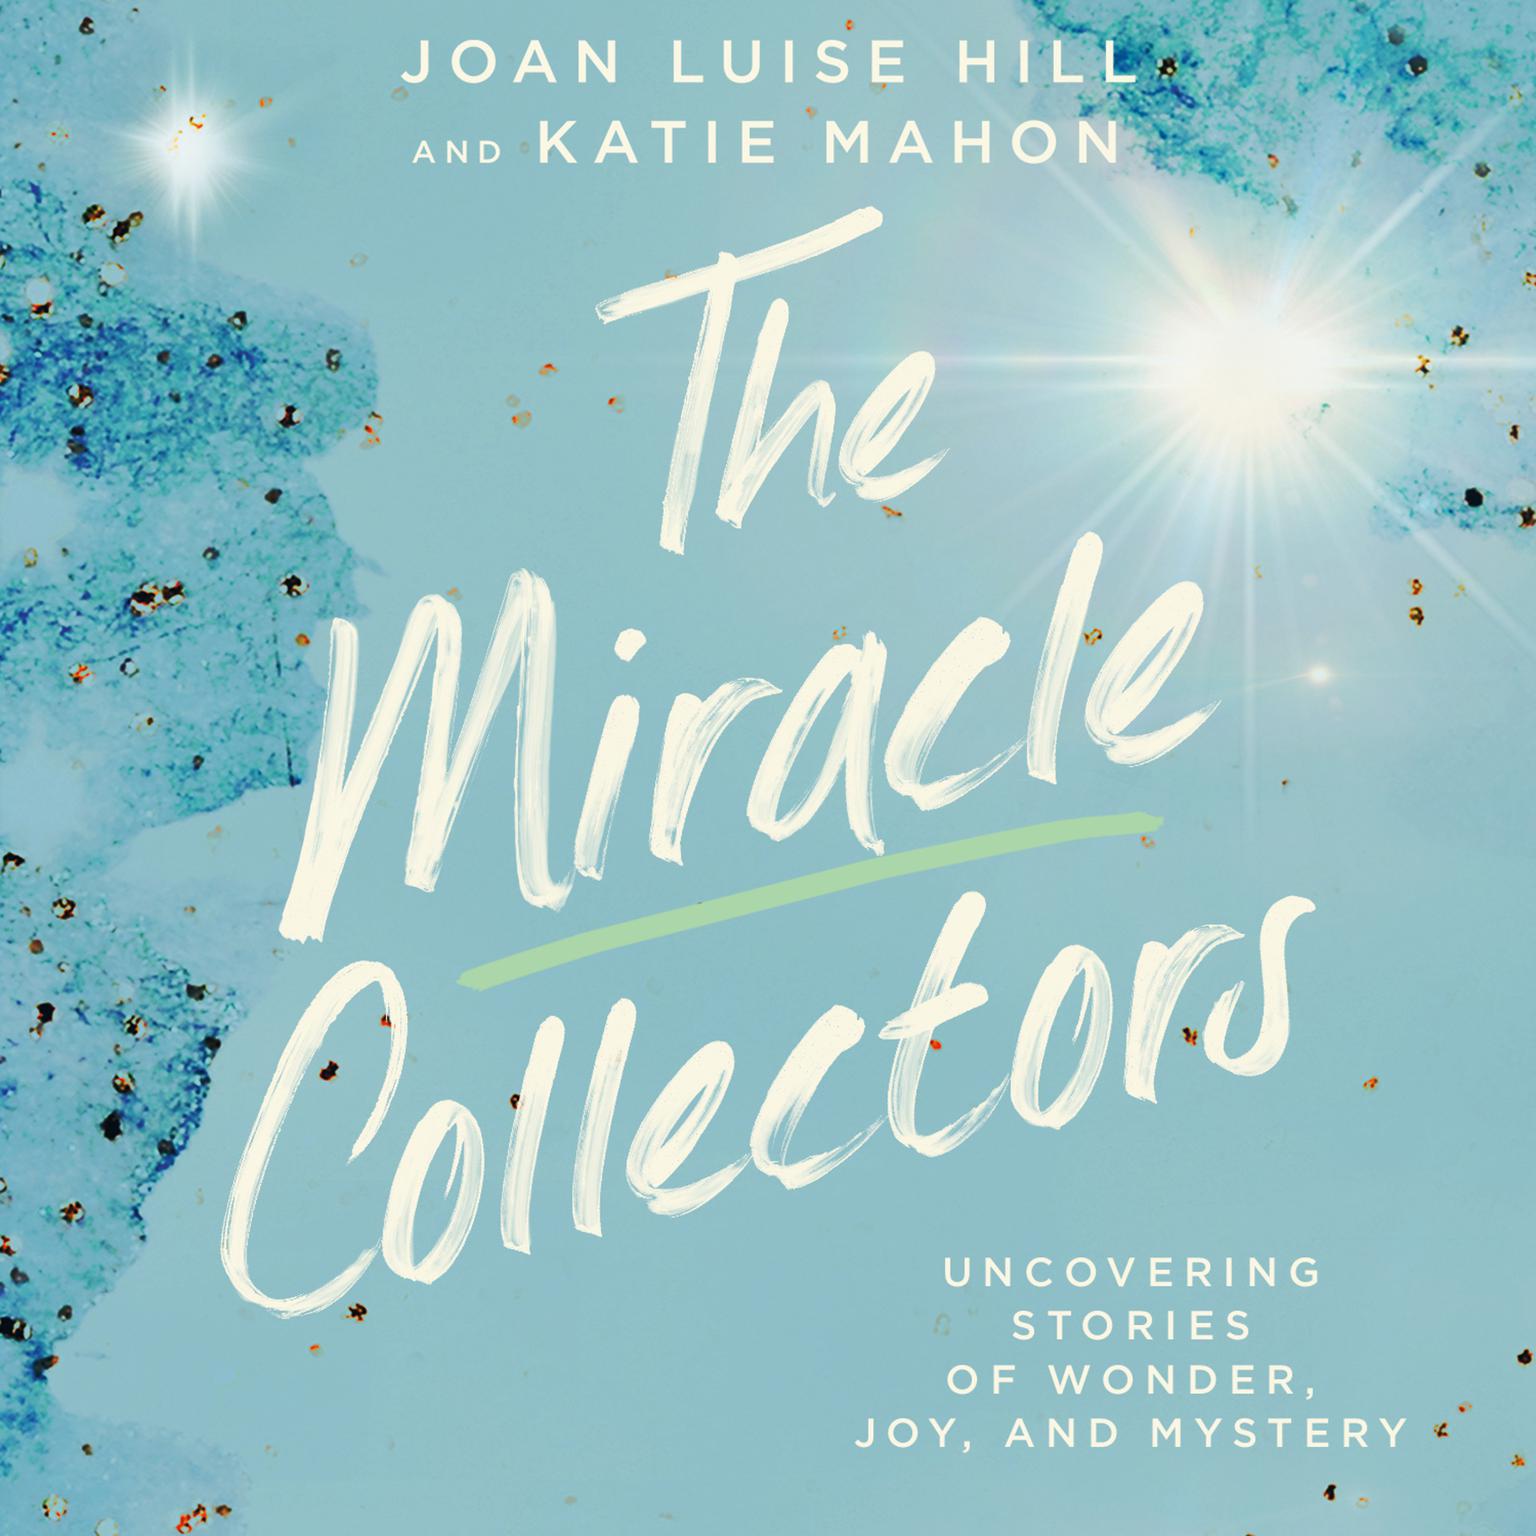 The Miracle Collectors: Uncovering Stories of Wonder, Joy, and Mystery Audiobook, by Joan Luise Hill